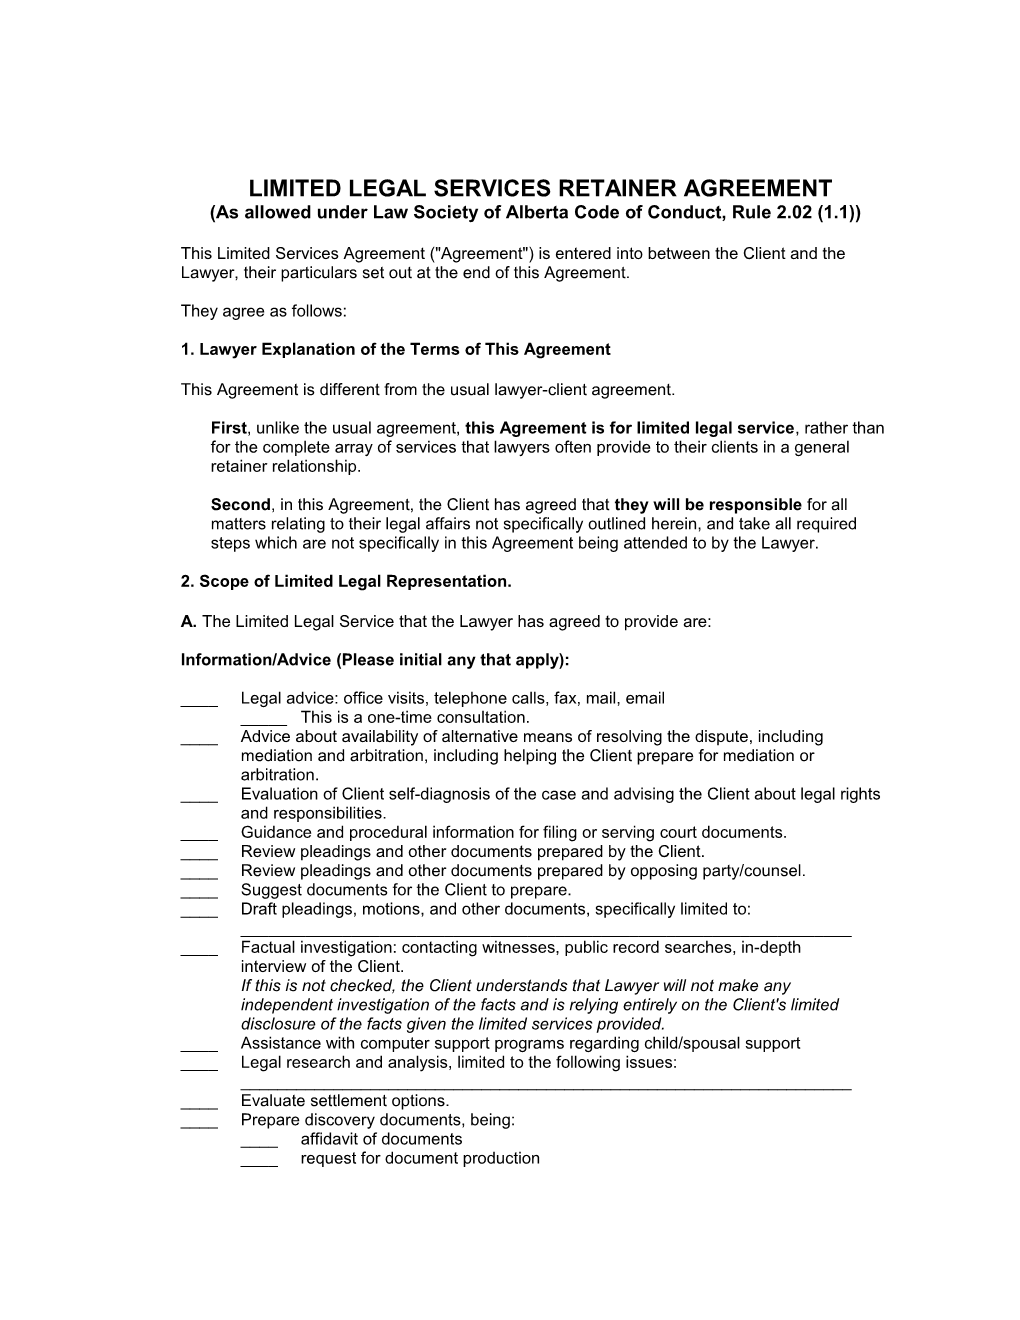 LIMITED LEGAL SERVICES RETAINER AGREEMENT (As Allowed Under Law Society of Alberta Code